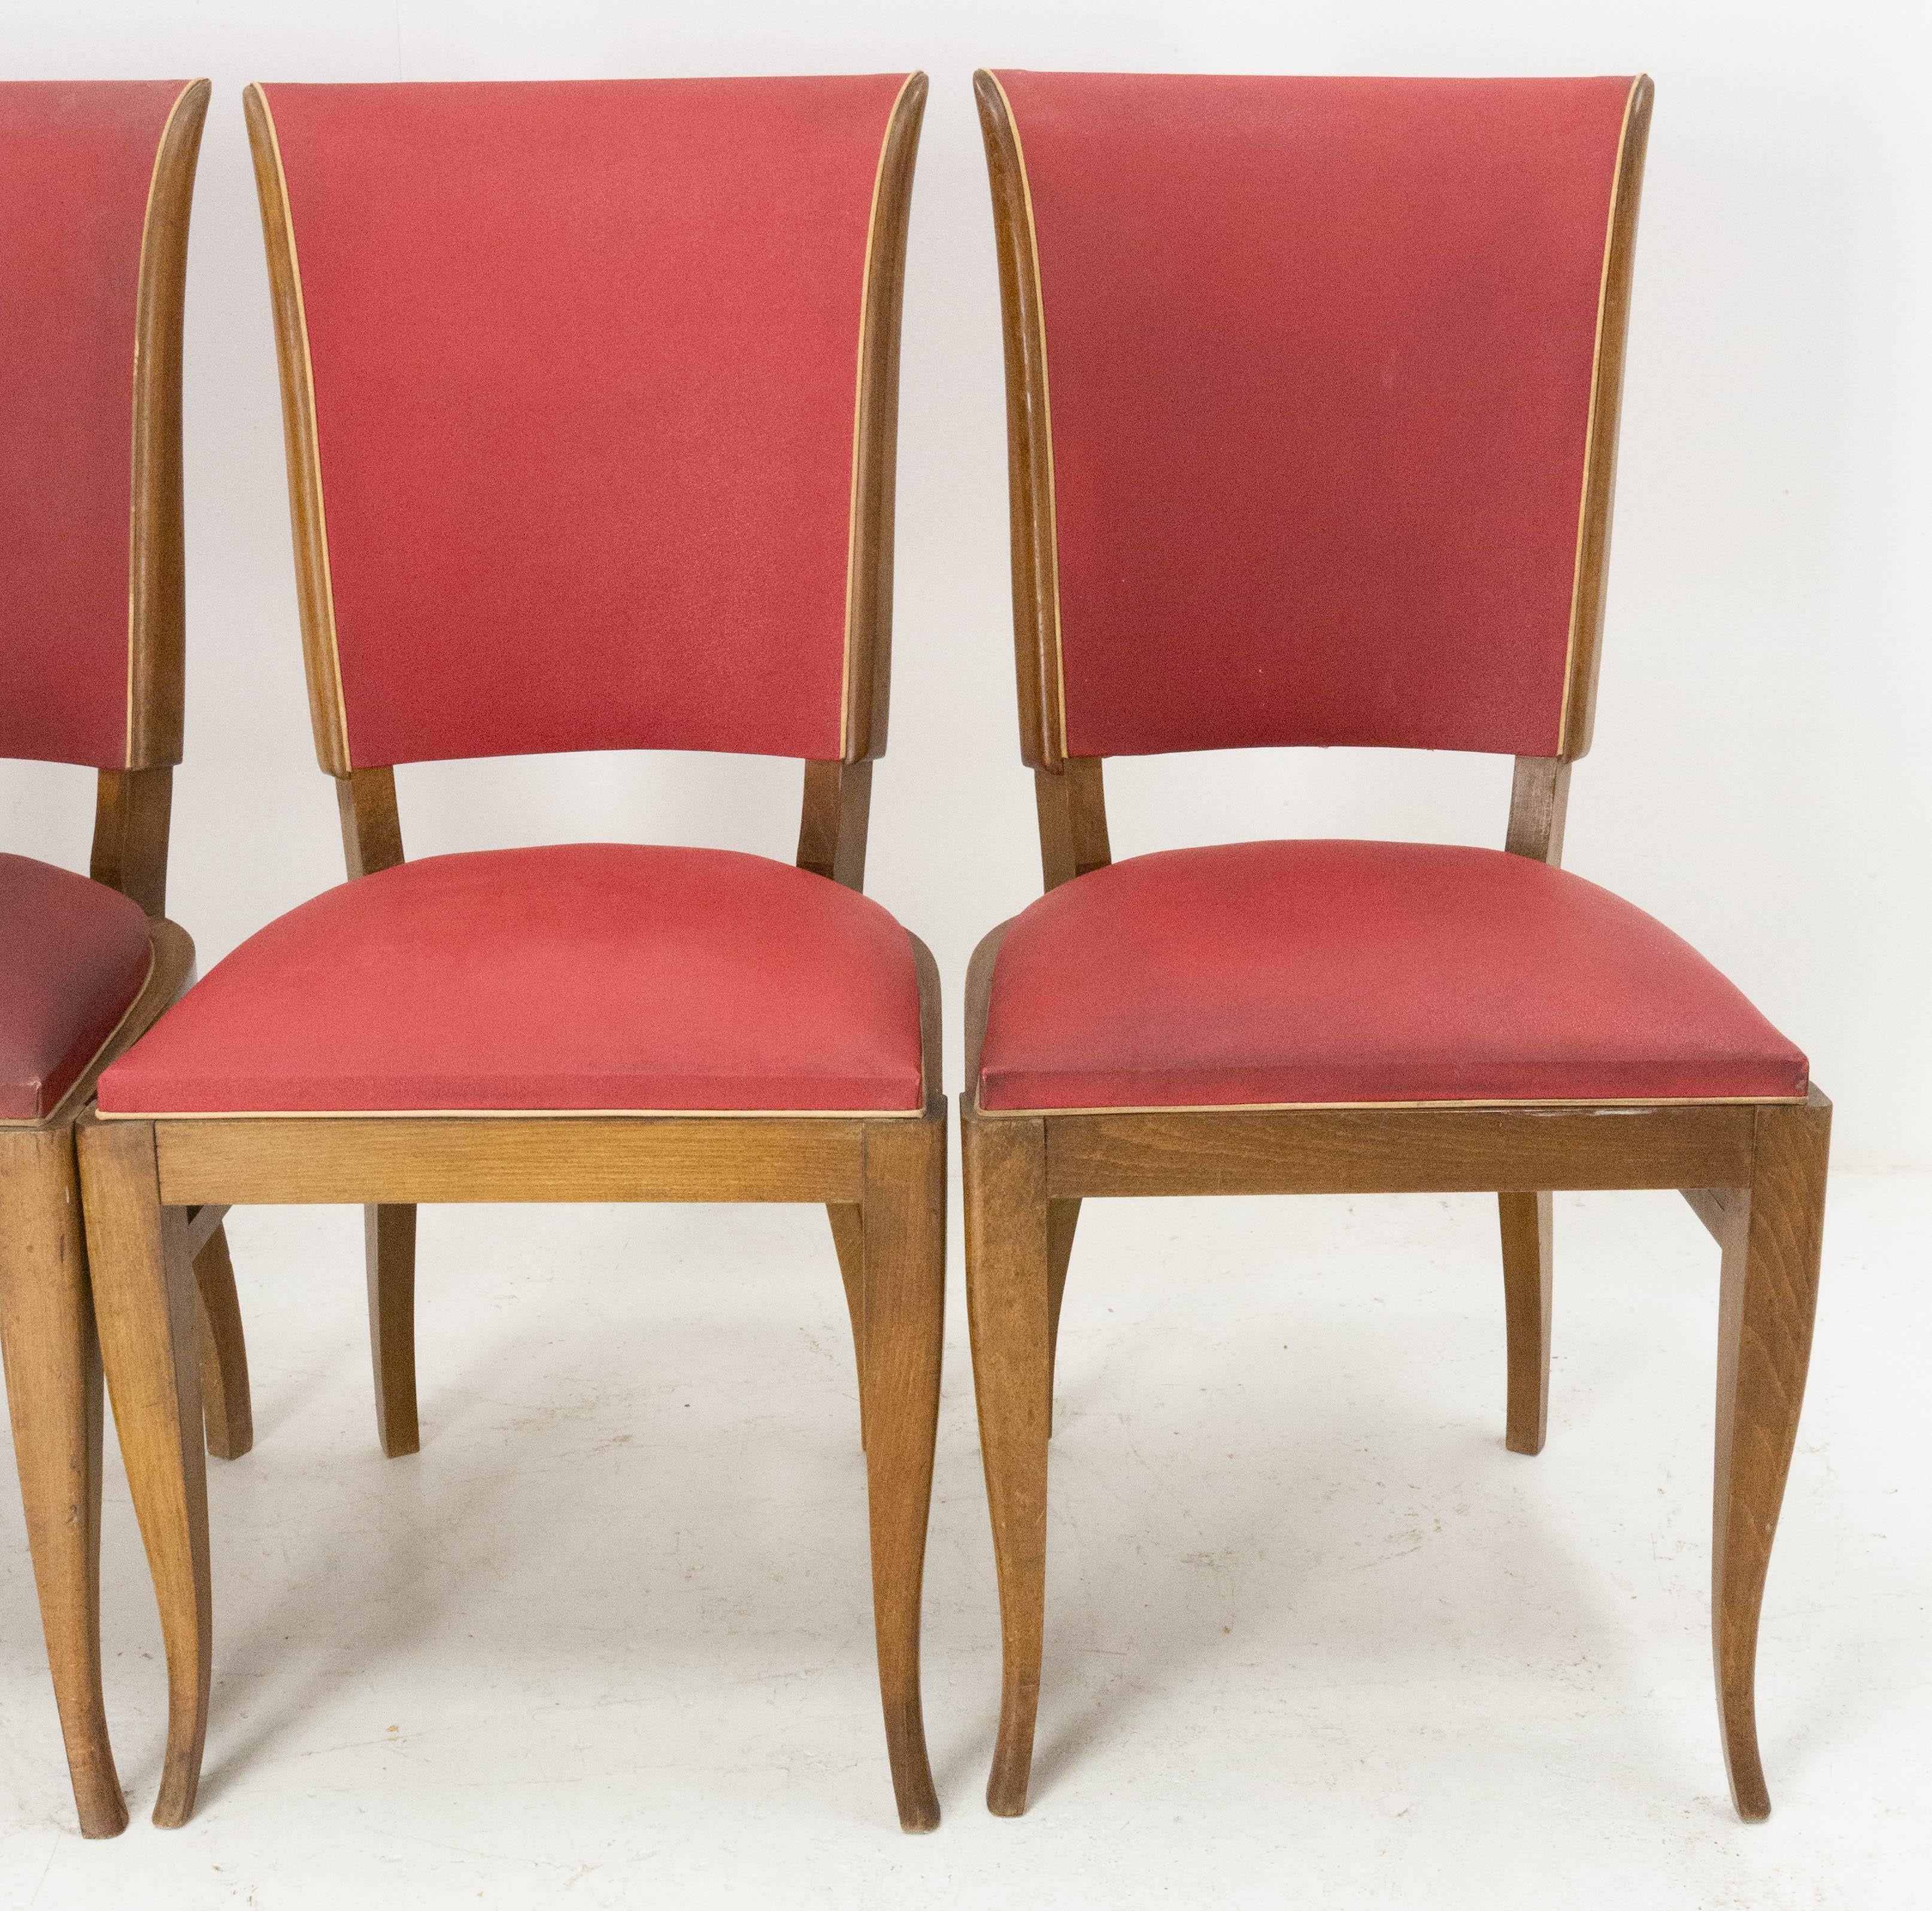 Four Vintage Beech Dining Chairs to be Re-upholstered, French, circa 1950 For Sale 1